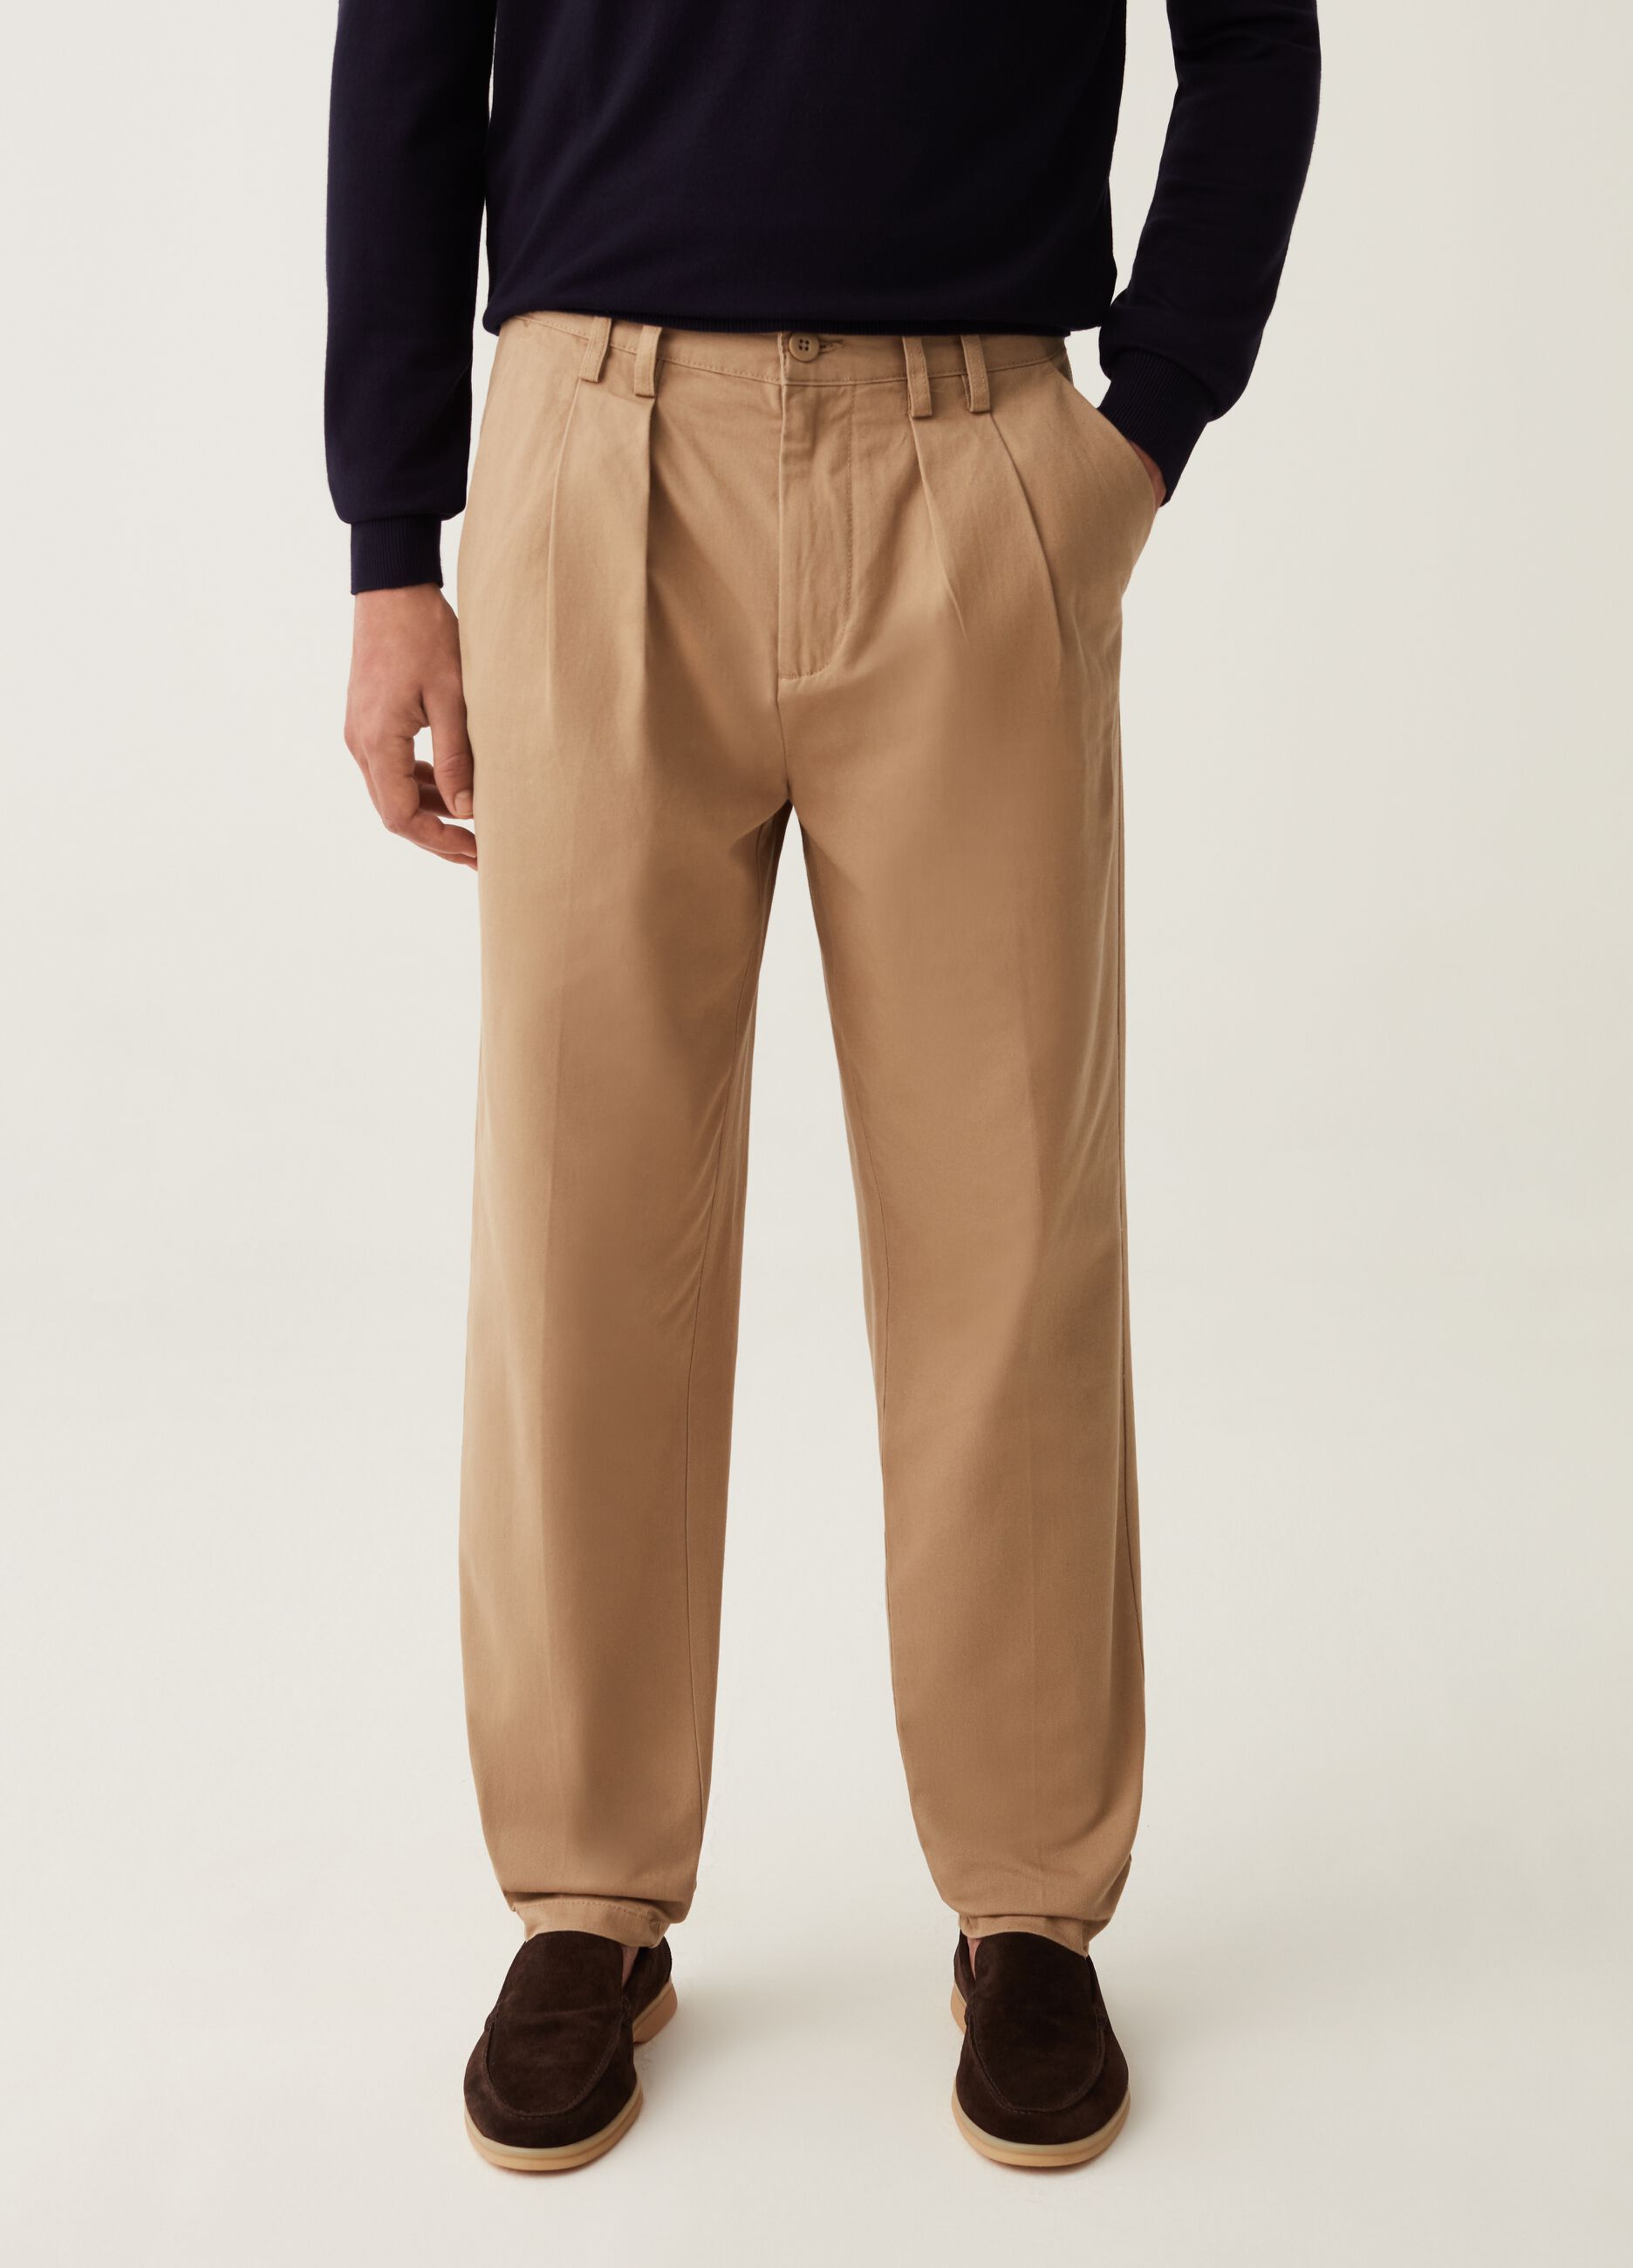 Buy Chinos For Men At Best Prices Online From Nykaa Fashion